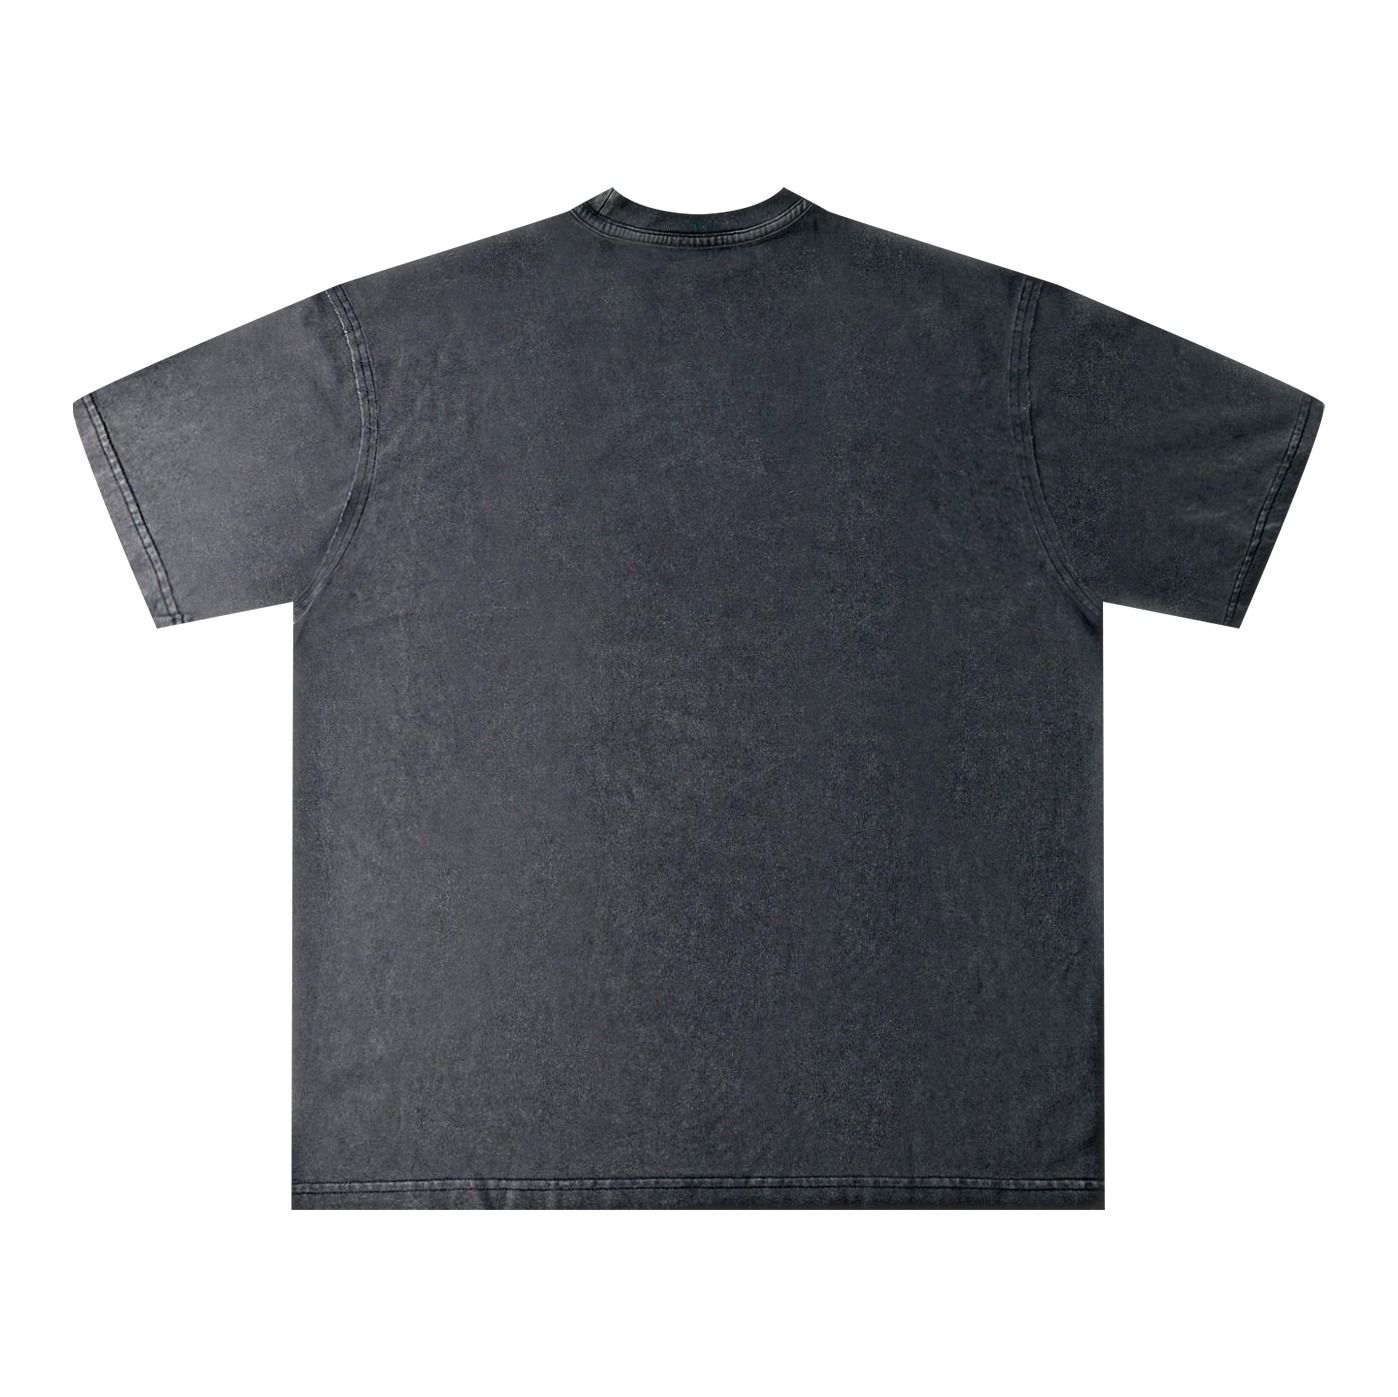 Aly Good Vibes - Washed Tee (Grey)